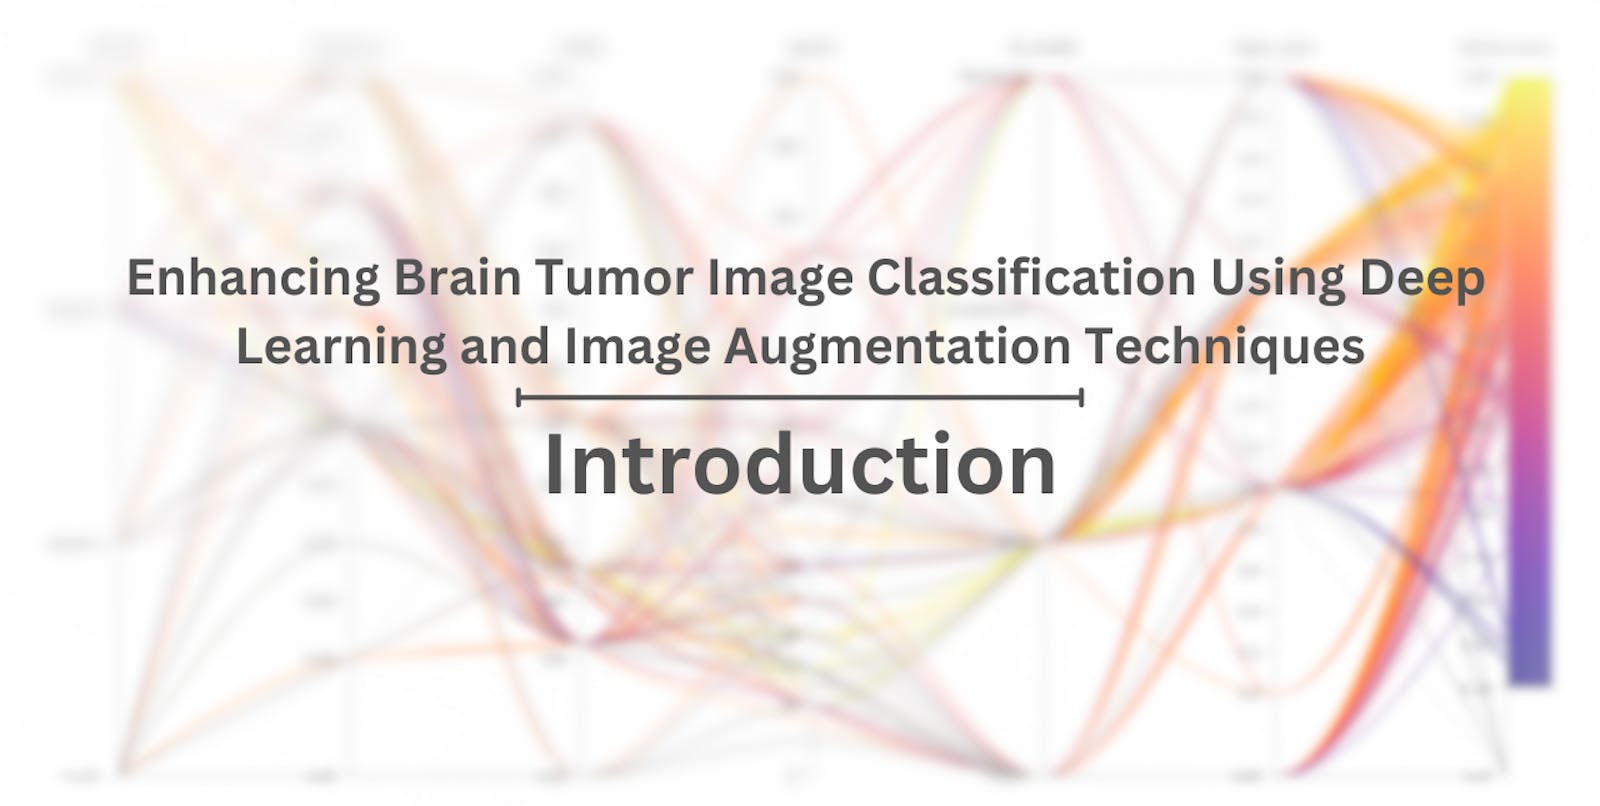 Introduction: Enhancing Brain Tumor Image Classification Using Deep Learning and Image Augmentation Techniques